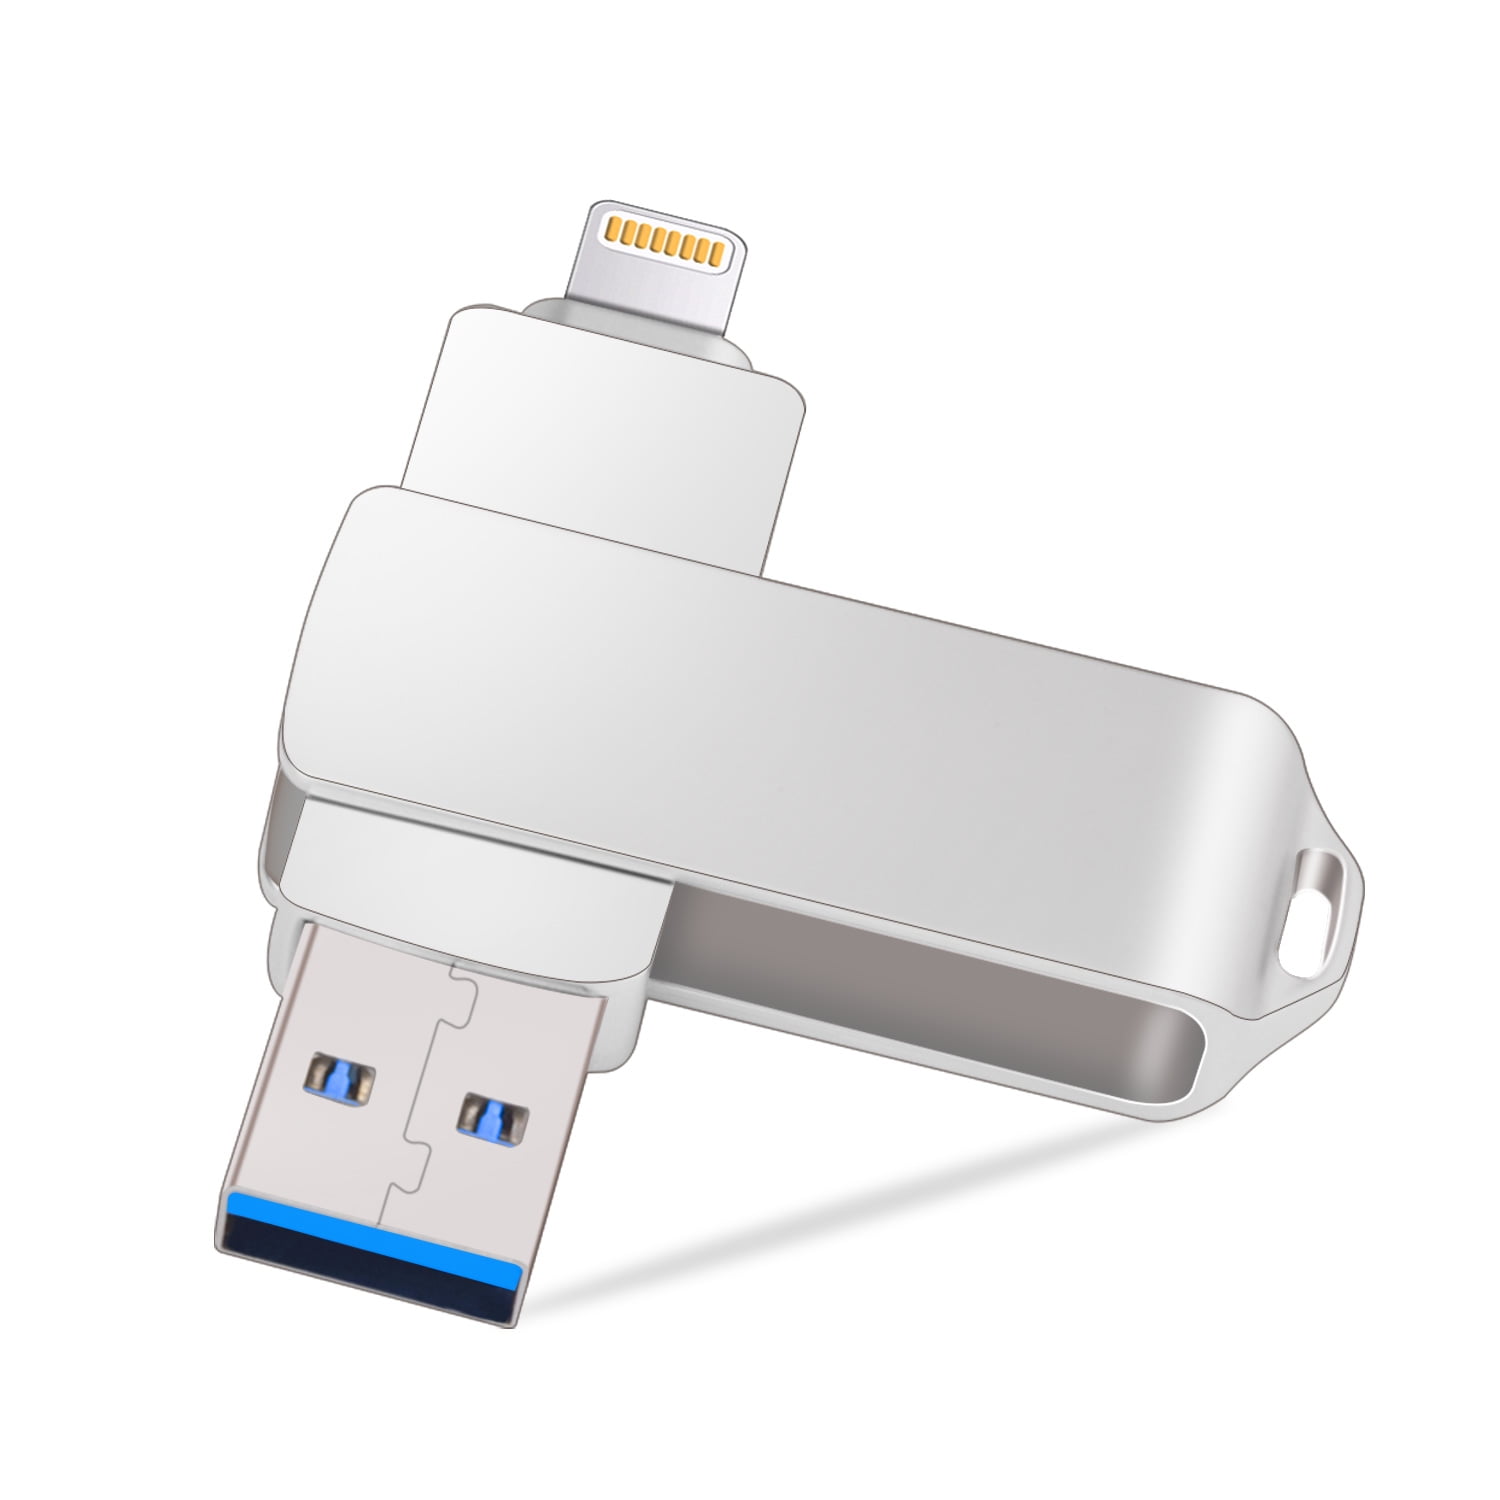 Smitsom sygdom loop tempereret 64GB USB Lightning Flash Drive for iPhone KOOTION USB 3.0 Type C 3-In-1  Metal Thumb Drive Jump Drives Memory Stick External Storage for iOS iPhone  iPad MacBook PC, Android - Walmart.com